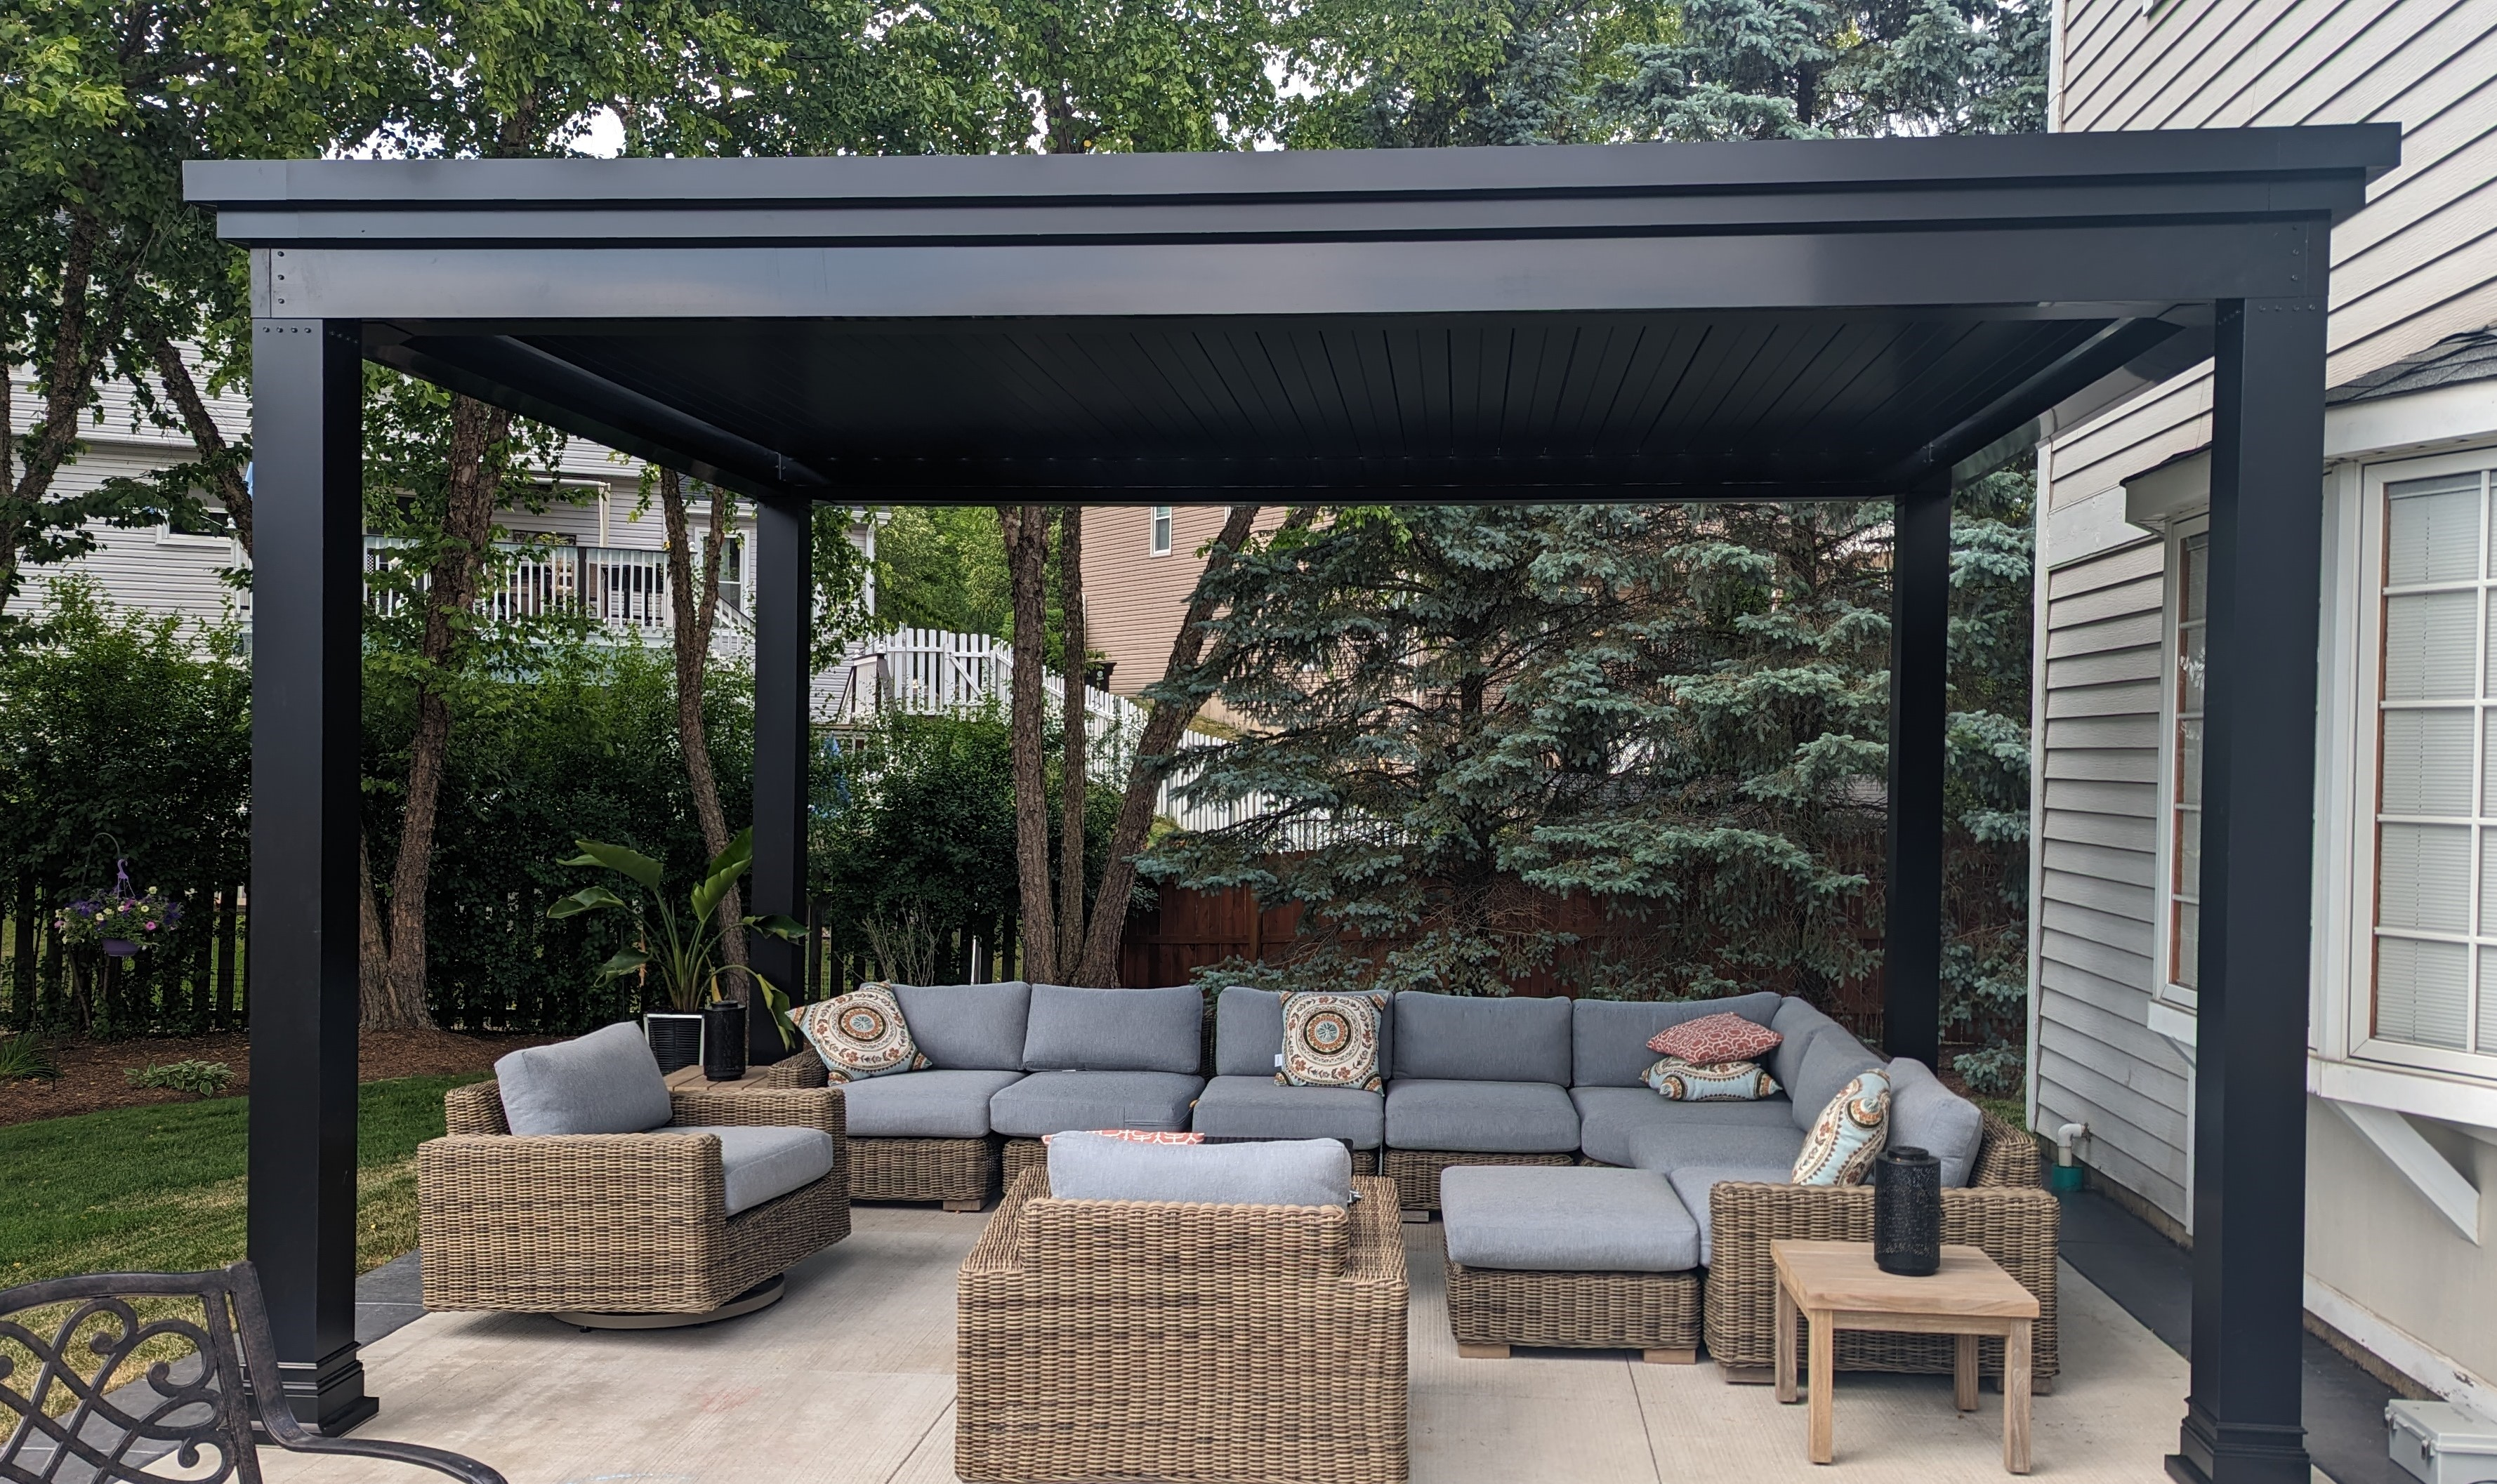 Patio with pergola casting shadow on outdoor living room under pergolas louvered roof.